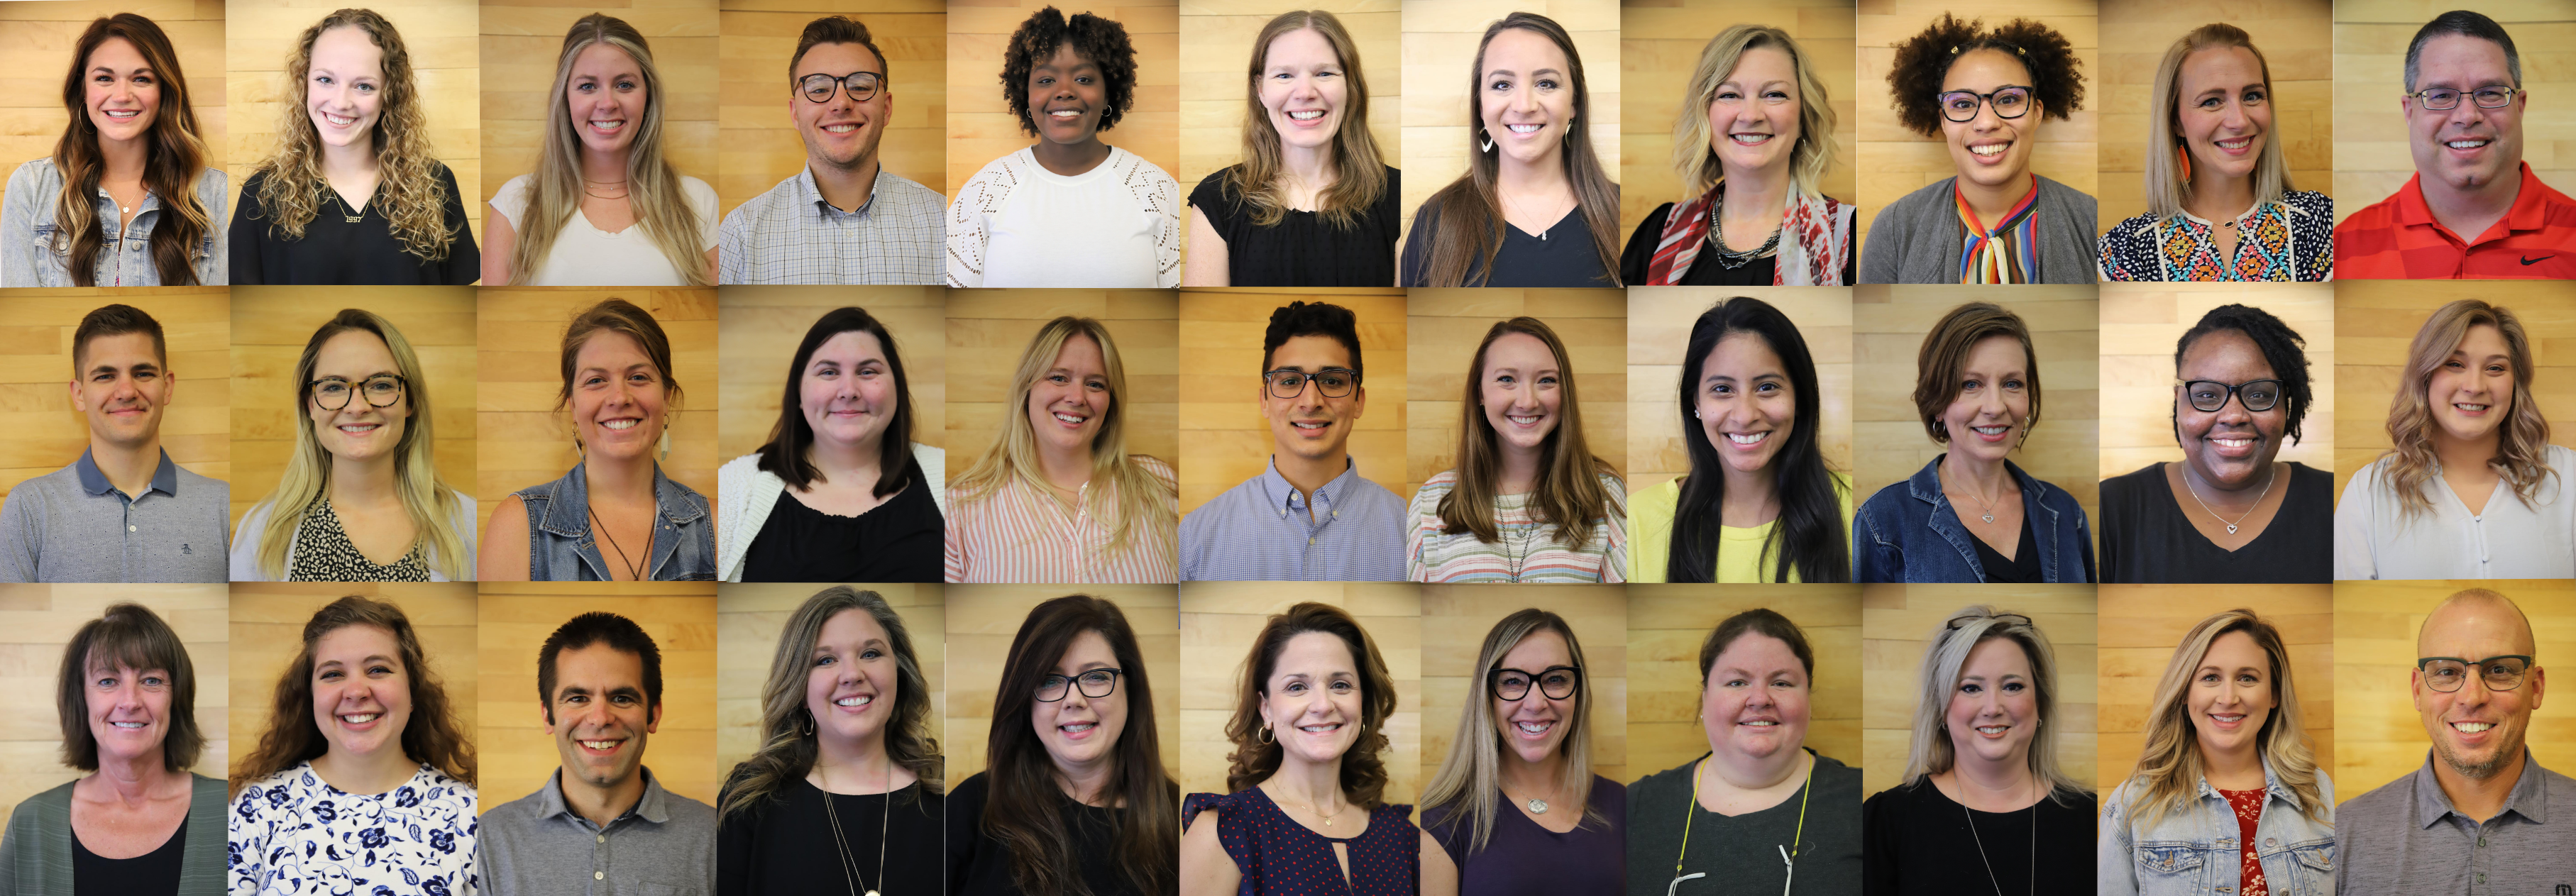 FPS New teacher portraits in a collage, from all over the district.